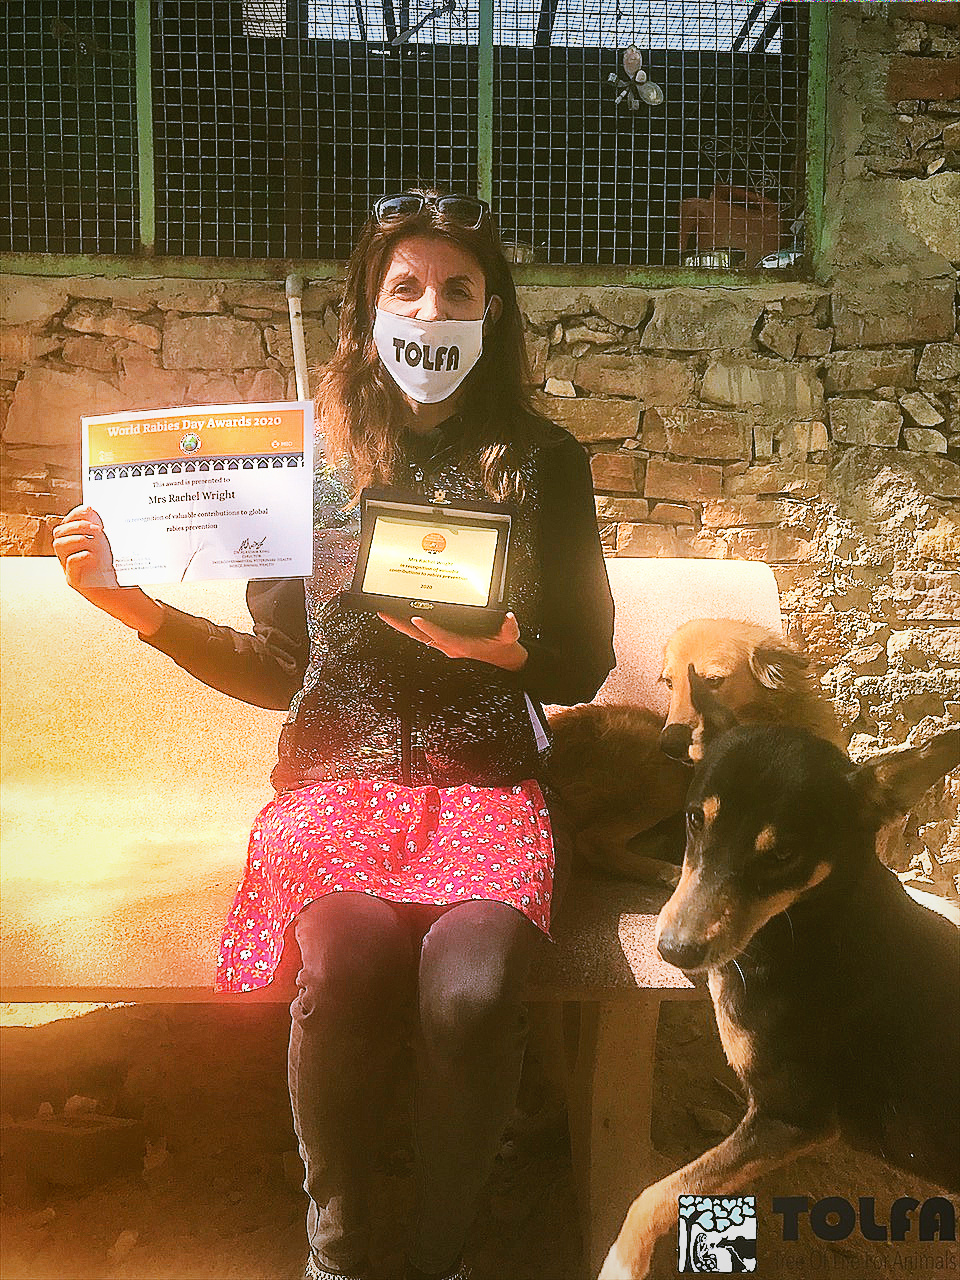 Community trust and engagement is critical to success: TOLFA's story. | End  Rabies Now